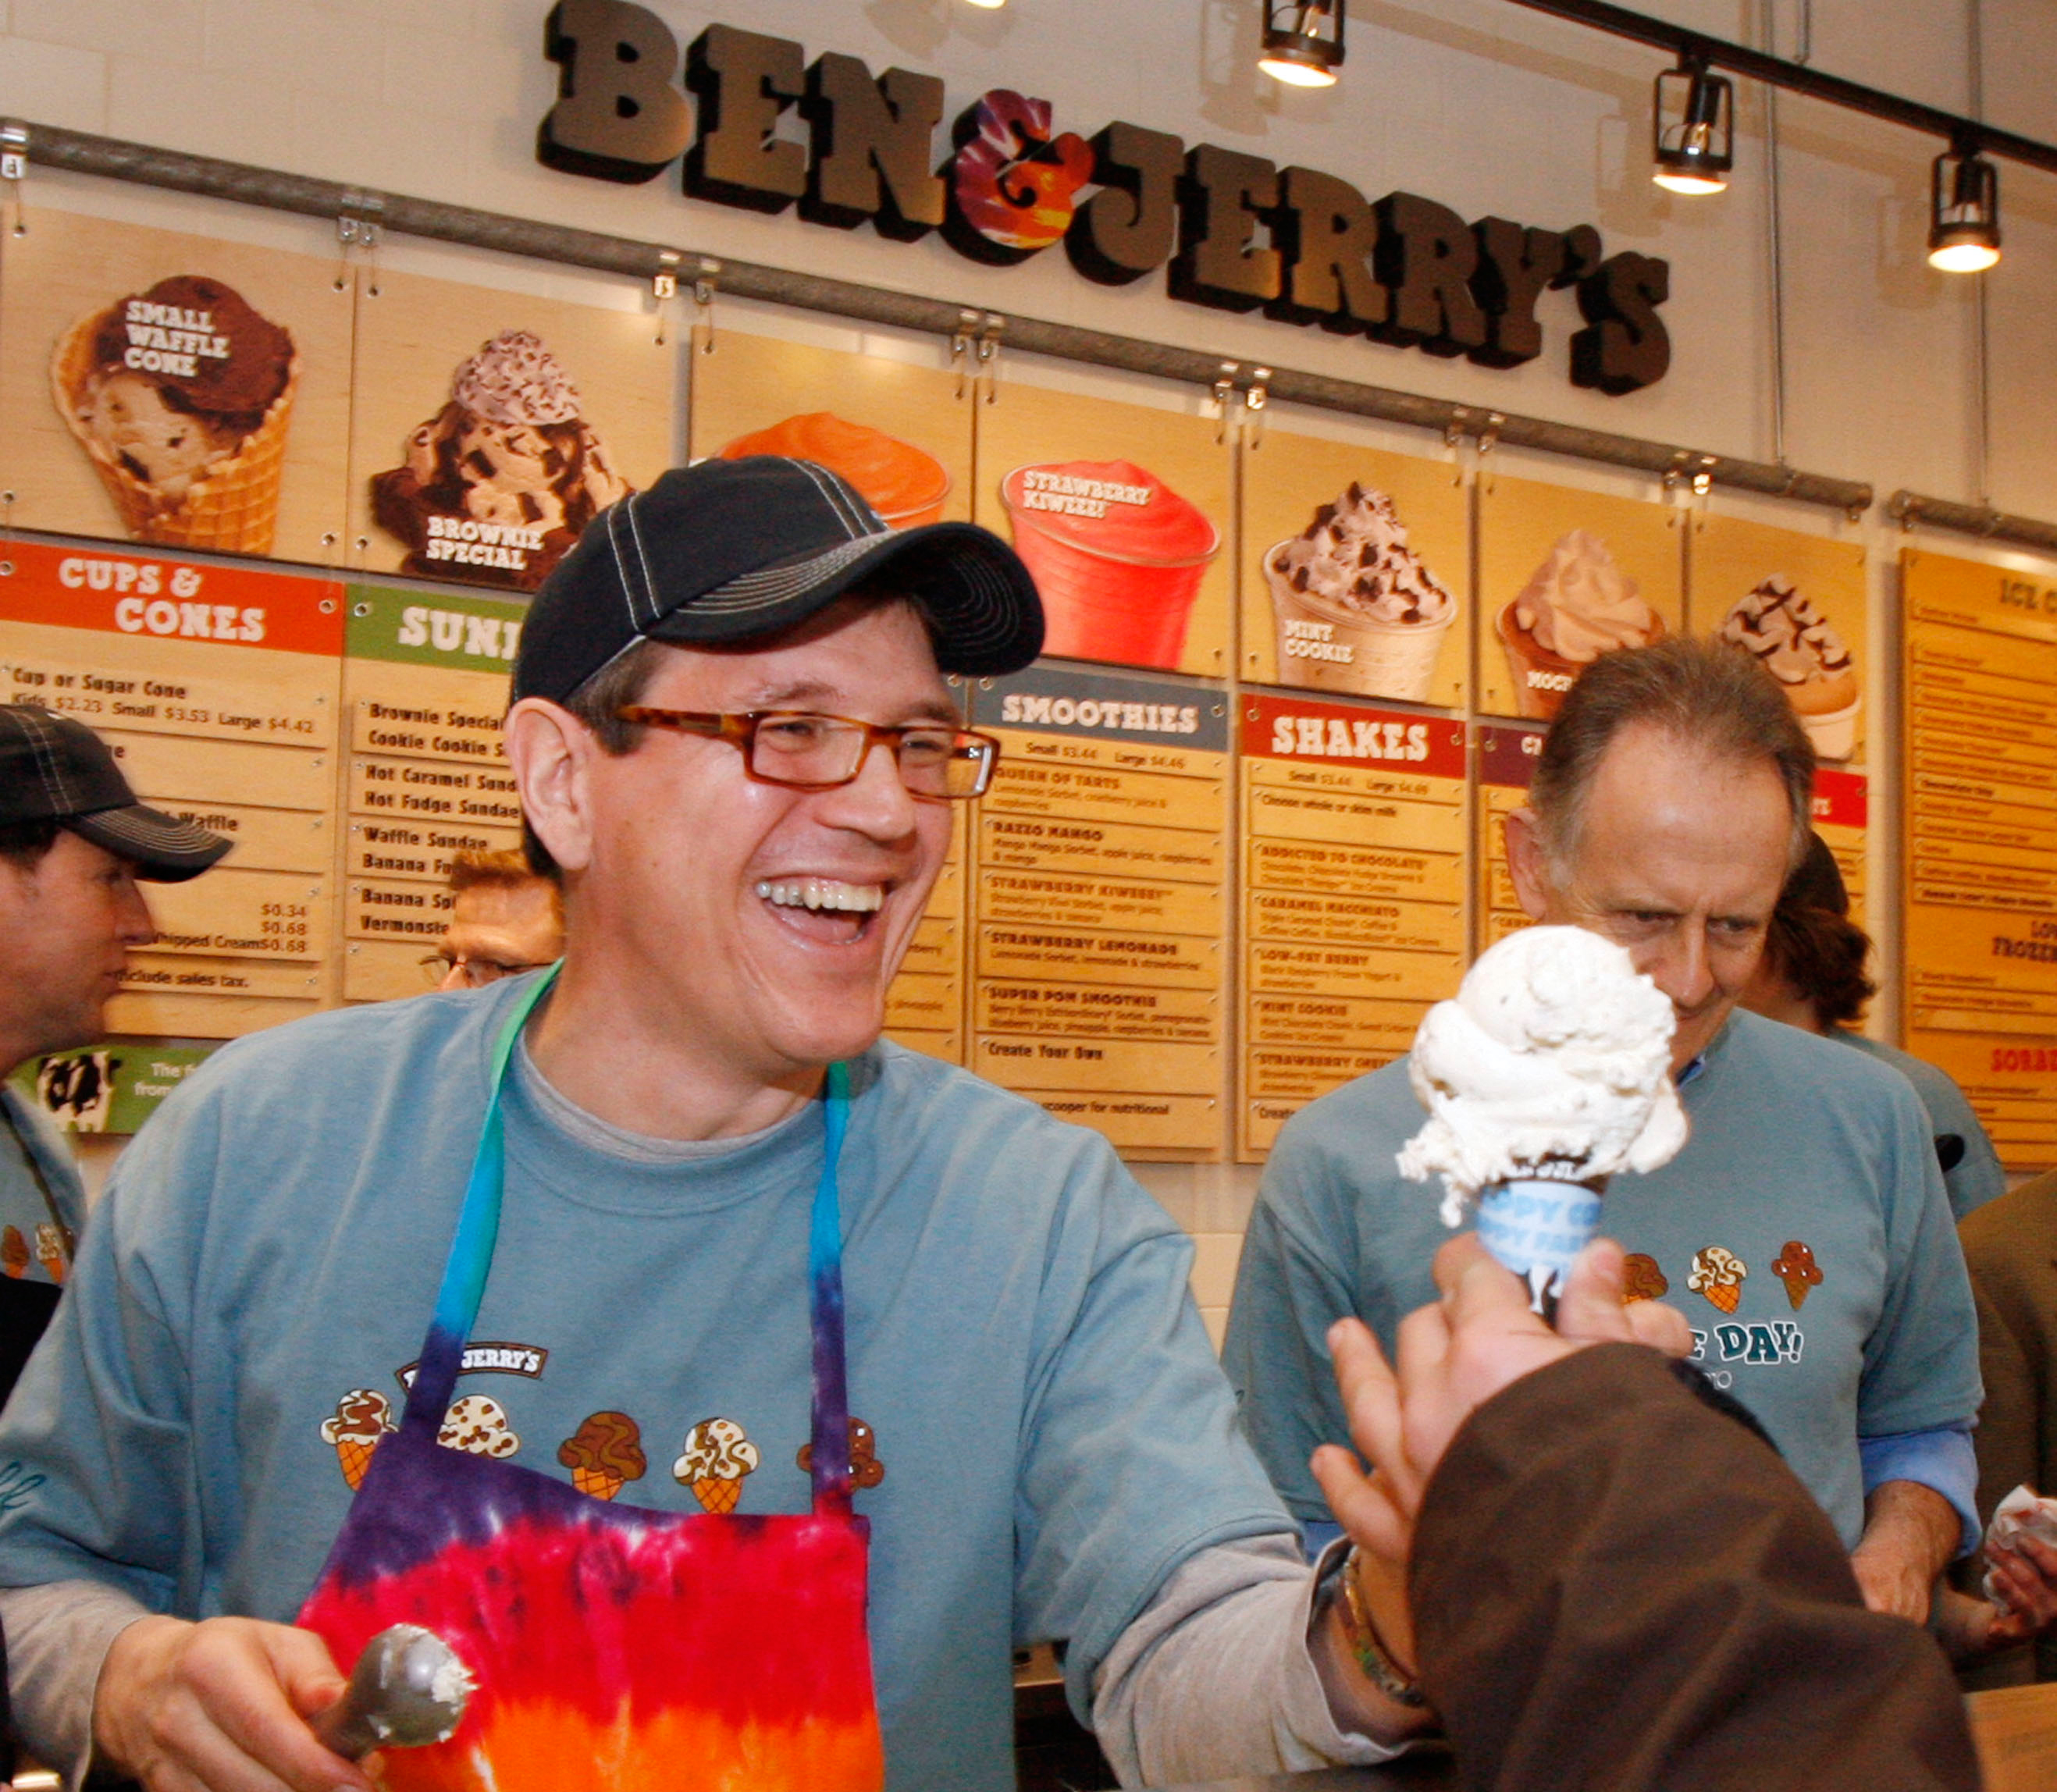 Free cone today at Ben & Jerry’s